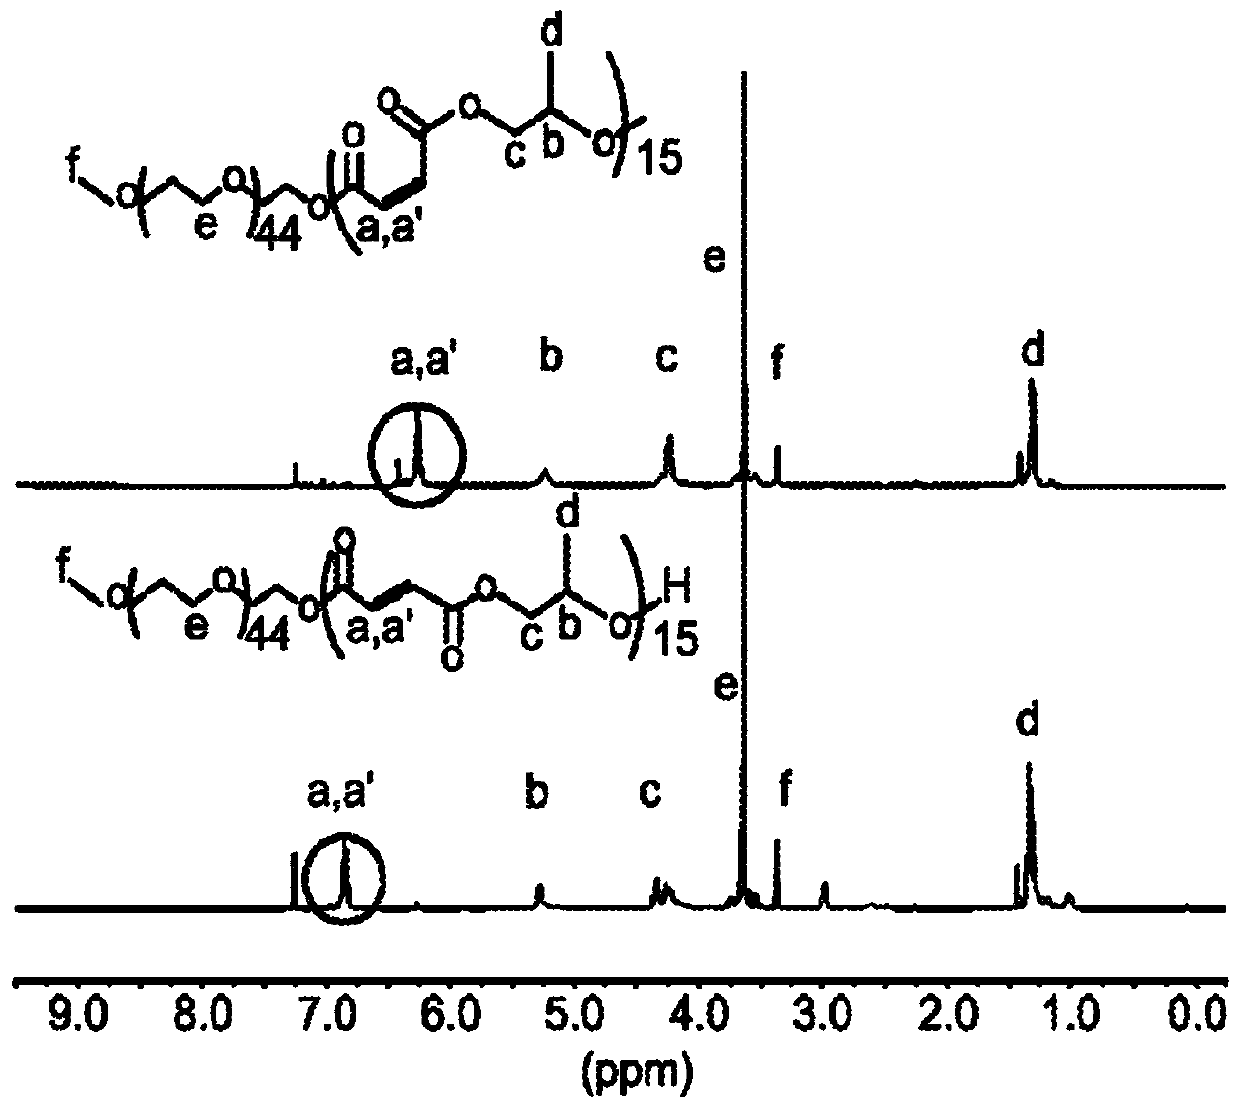 Synthesis and characterization of well defined poly(propylene fumarate) and poly(ethylene glycol) block copolymers